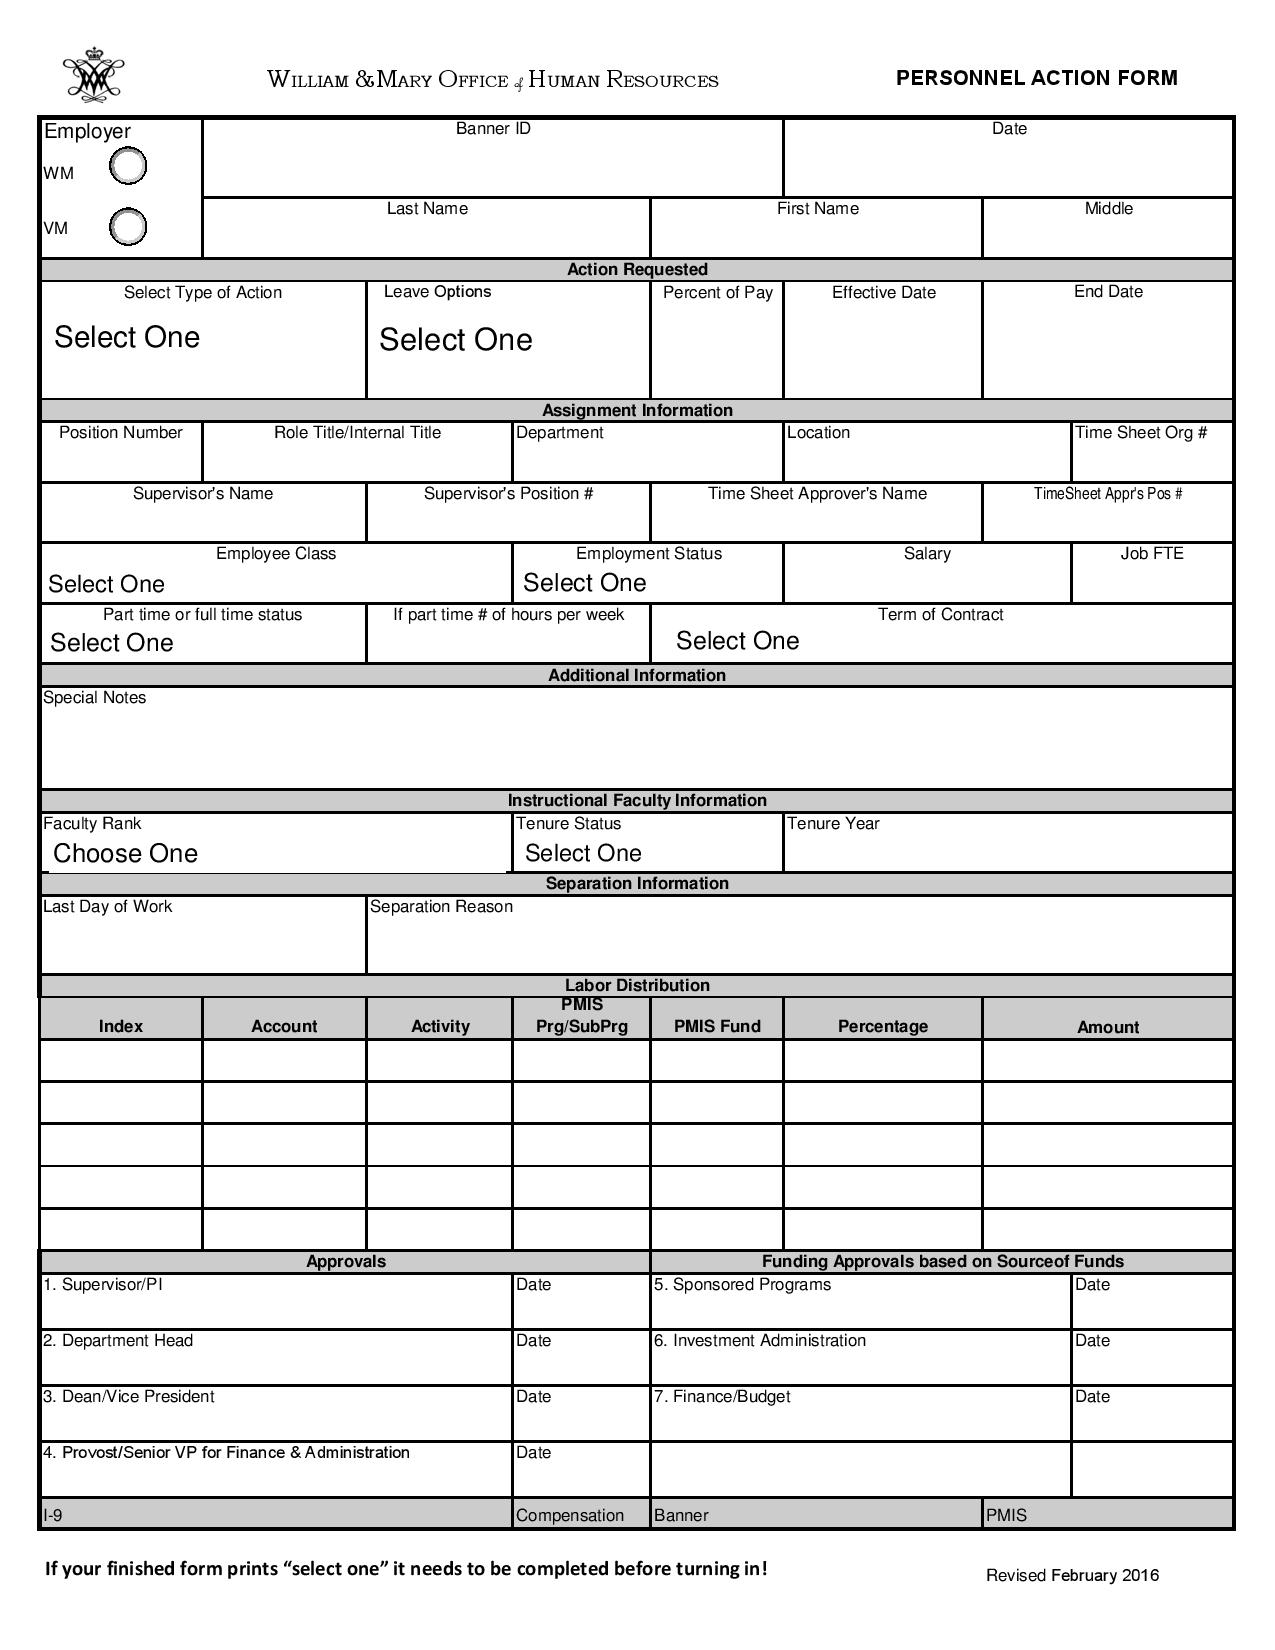 revised personnel action form page 0012